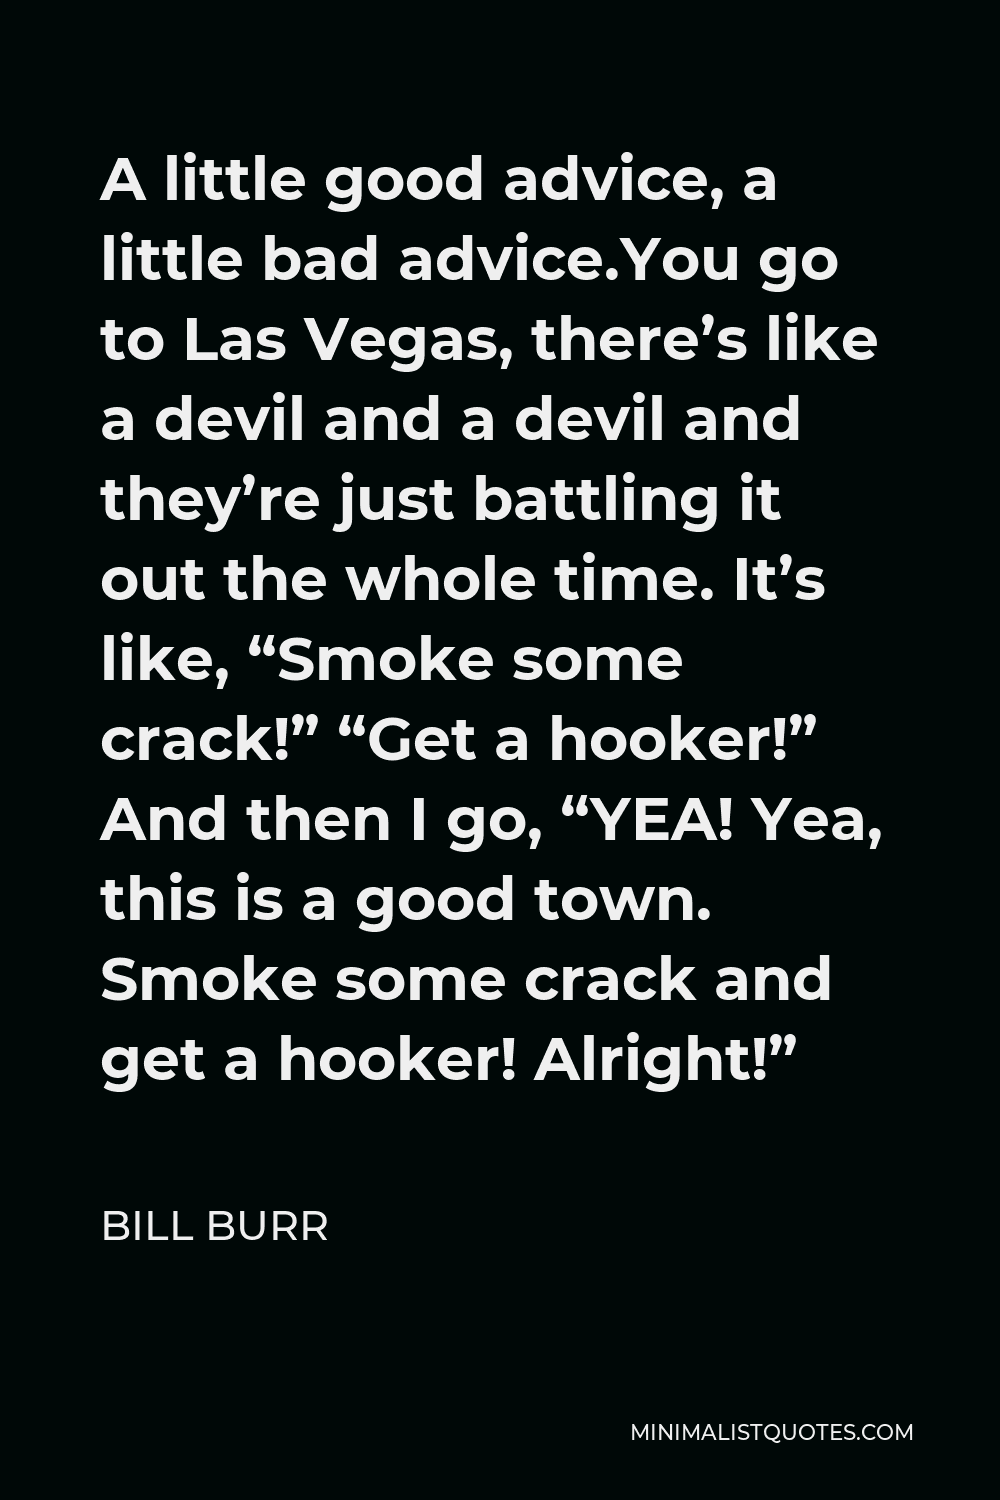 Bill Burr Quote - A little good advice, a little bad advice.You go to Las Vegas, there’s like a devil and a devil and they’re just battling it out the whole time. It’s like, “Smoke some crack!” “Get a hooker!” And then I go, “YEA! Yea, this is a good town. Smoke some crack and get a hooker! Alright!”